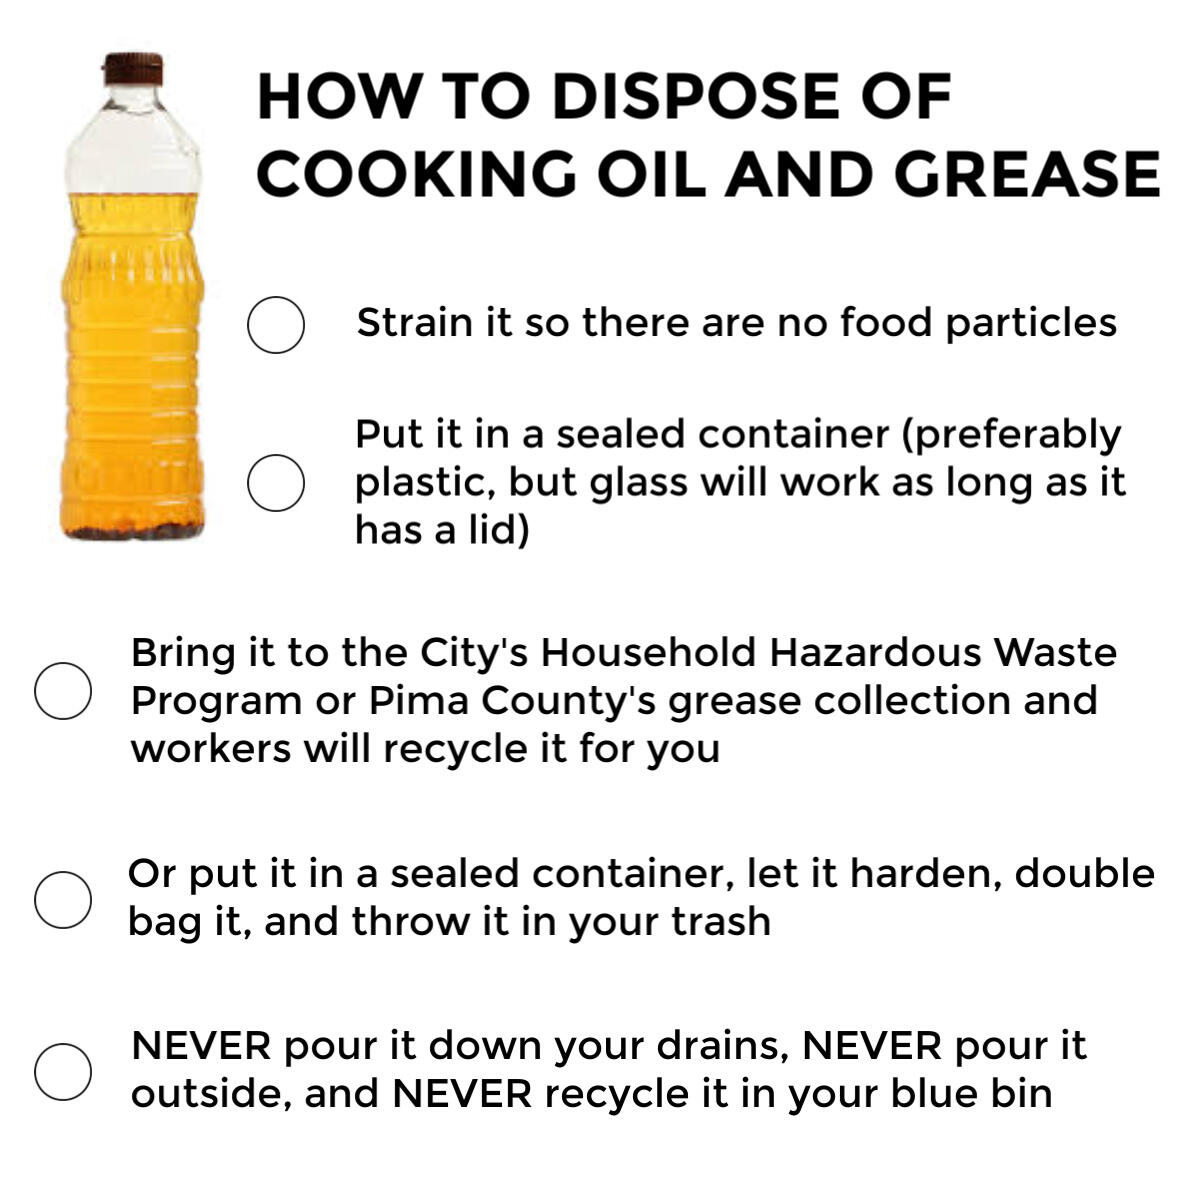 How to Properly Dispose of Cooking Oil and Grease